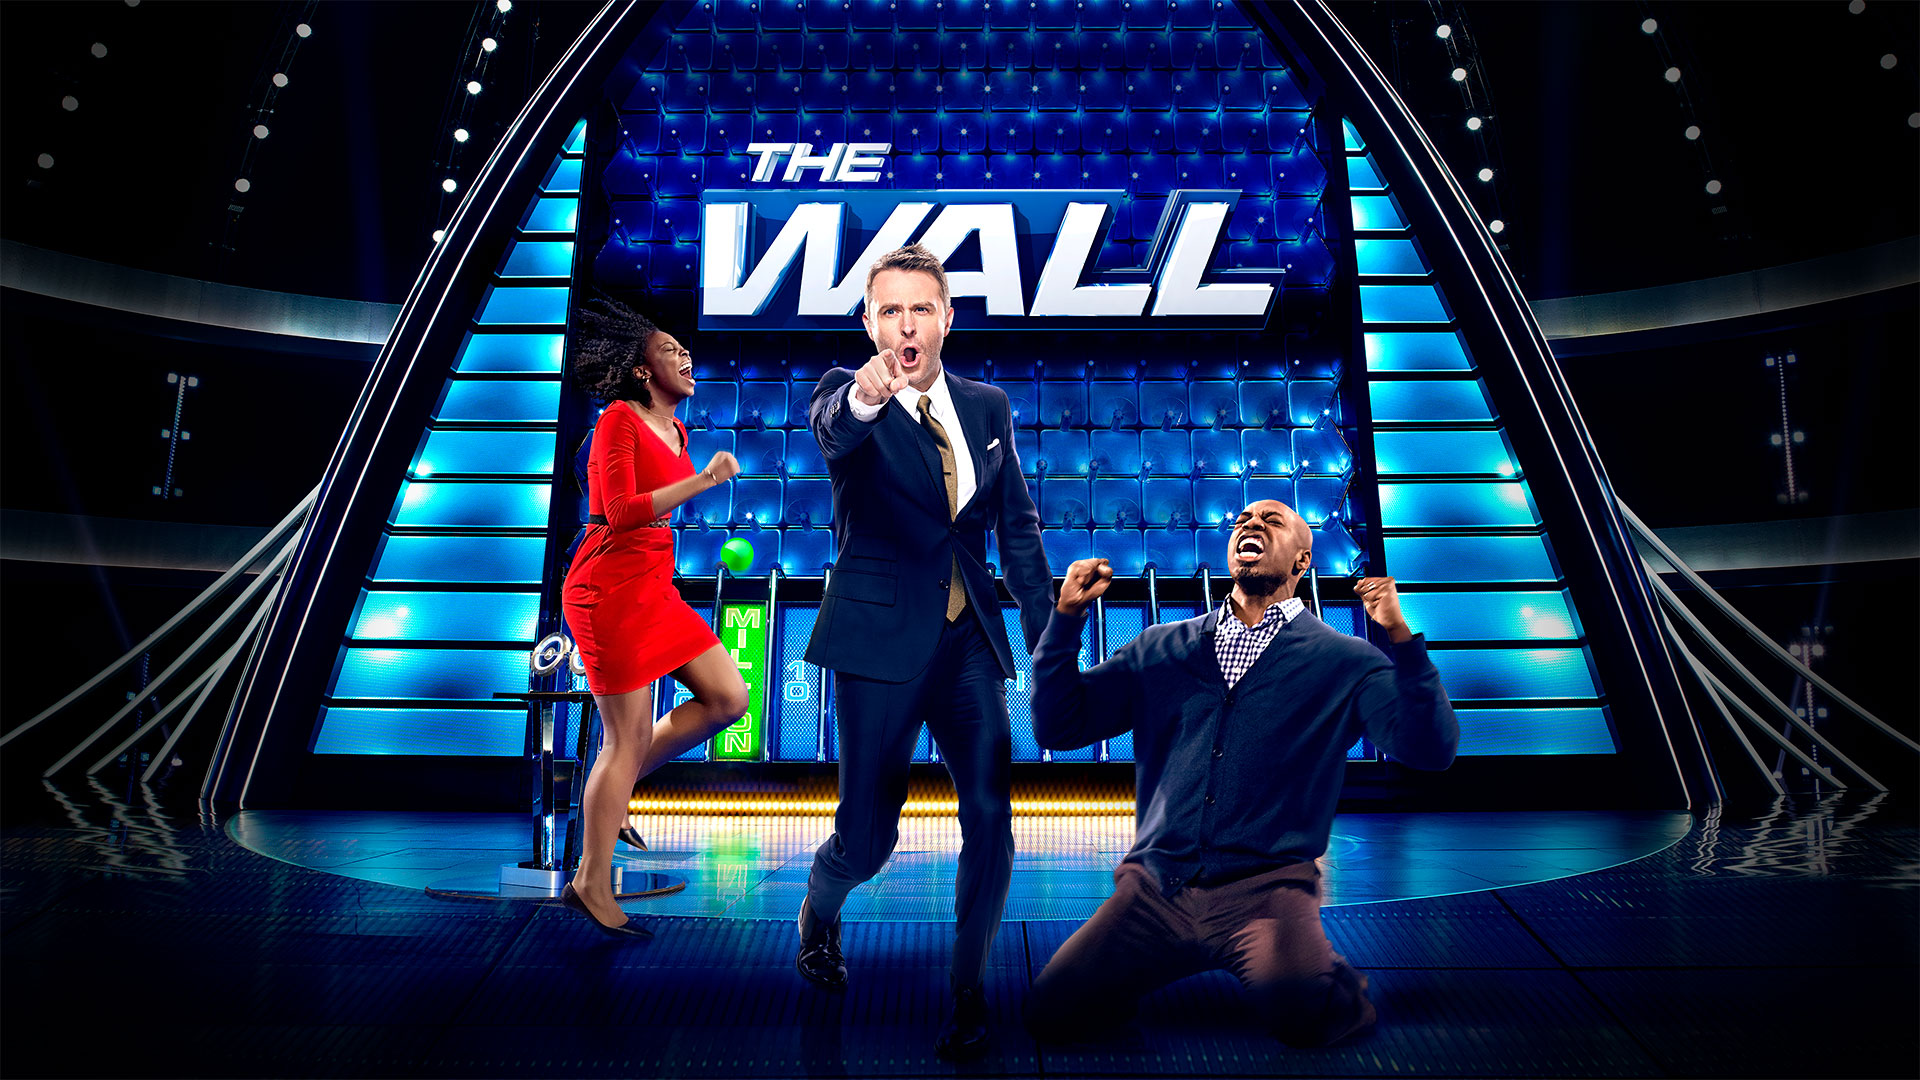 Watch The Wall Episodes - NBC.com